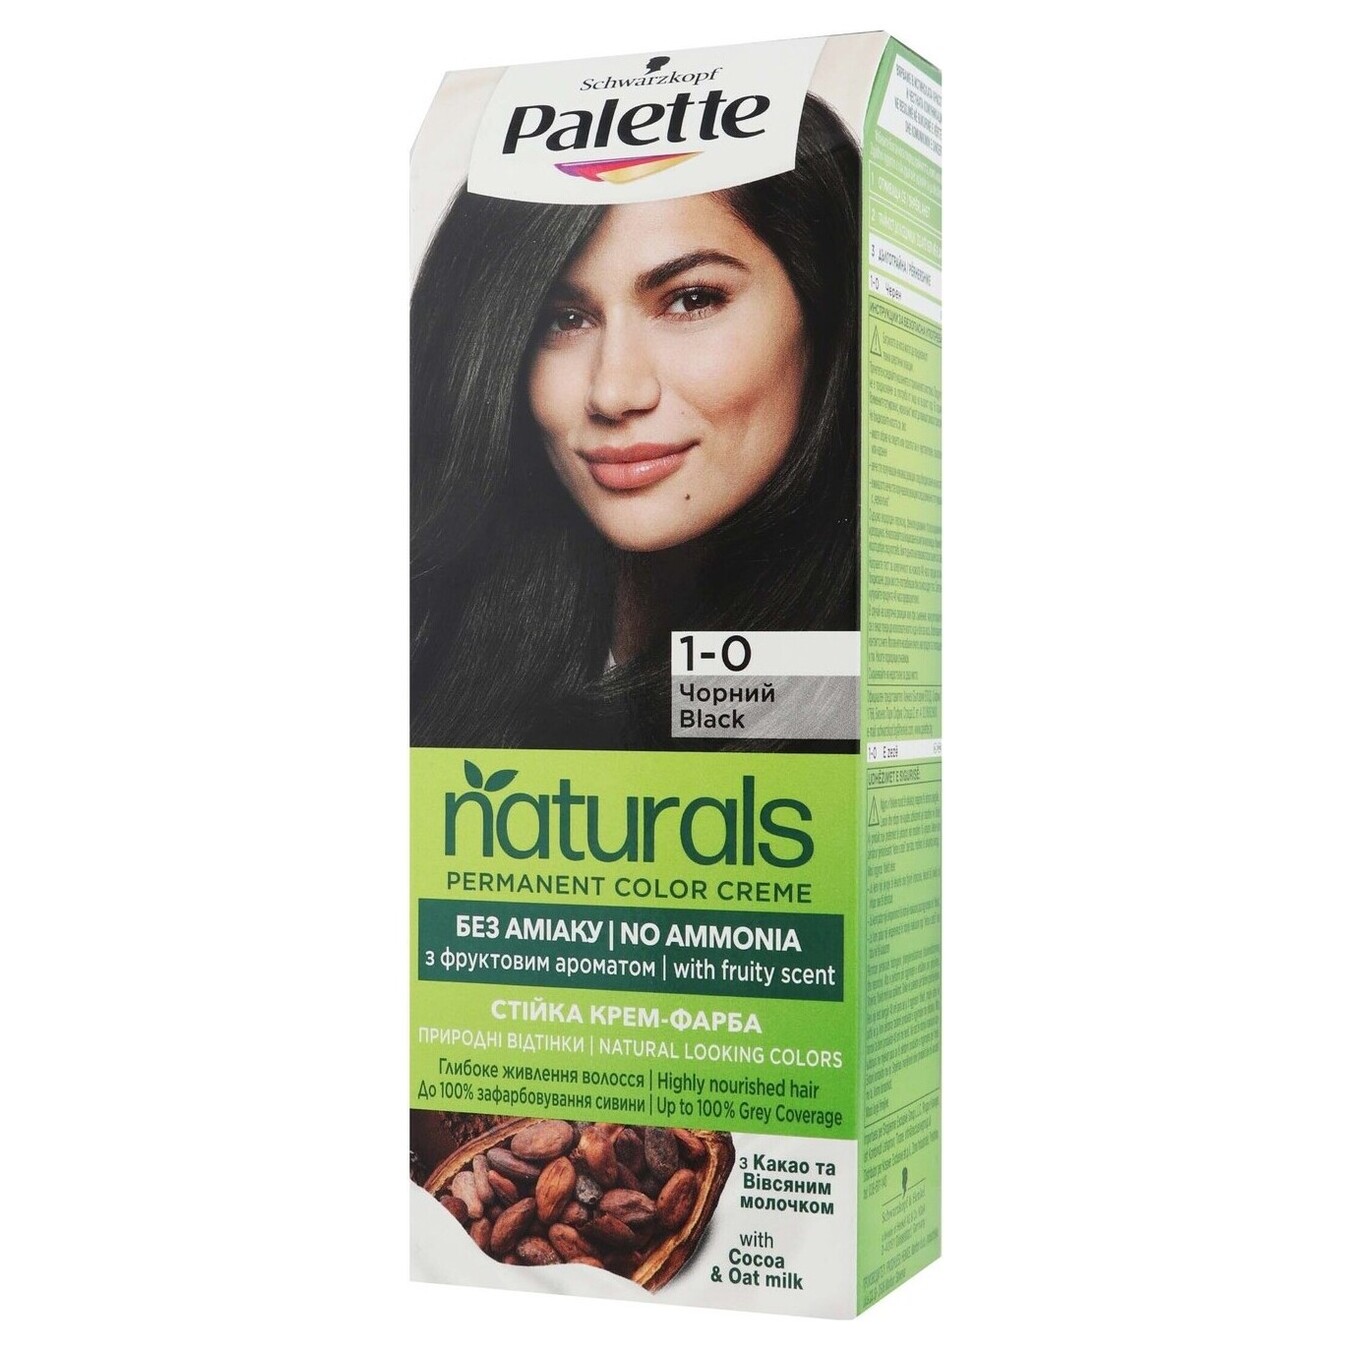 Cream paint Palette Naturals 1-0 Black for hair without ammonia permanent 110ml 2